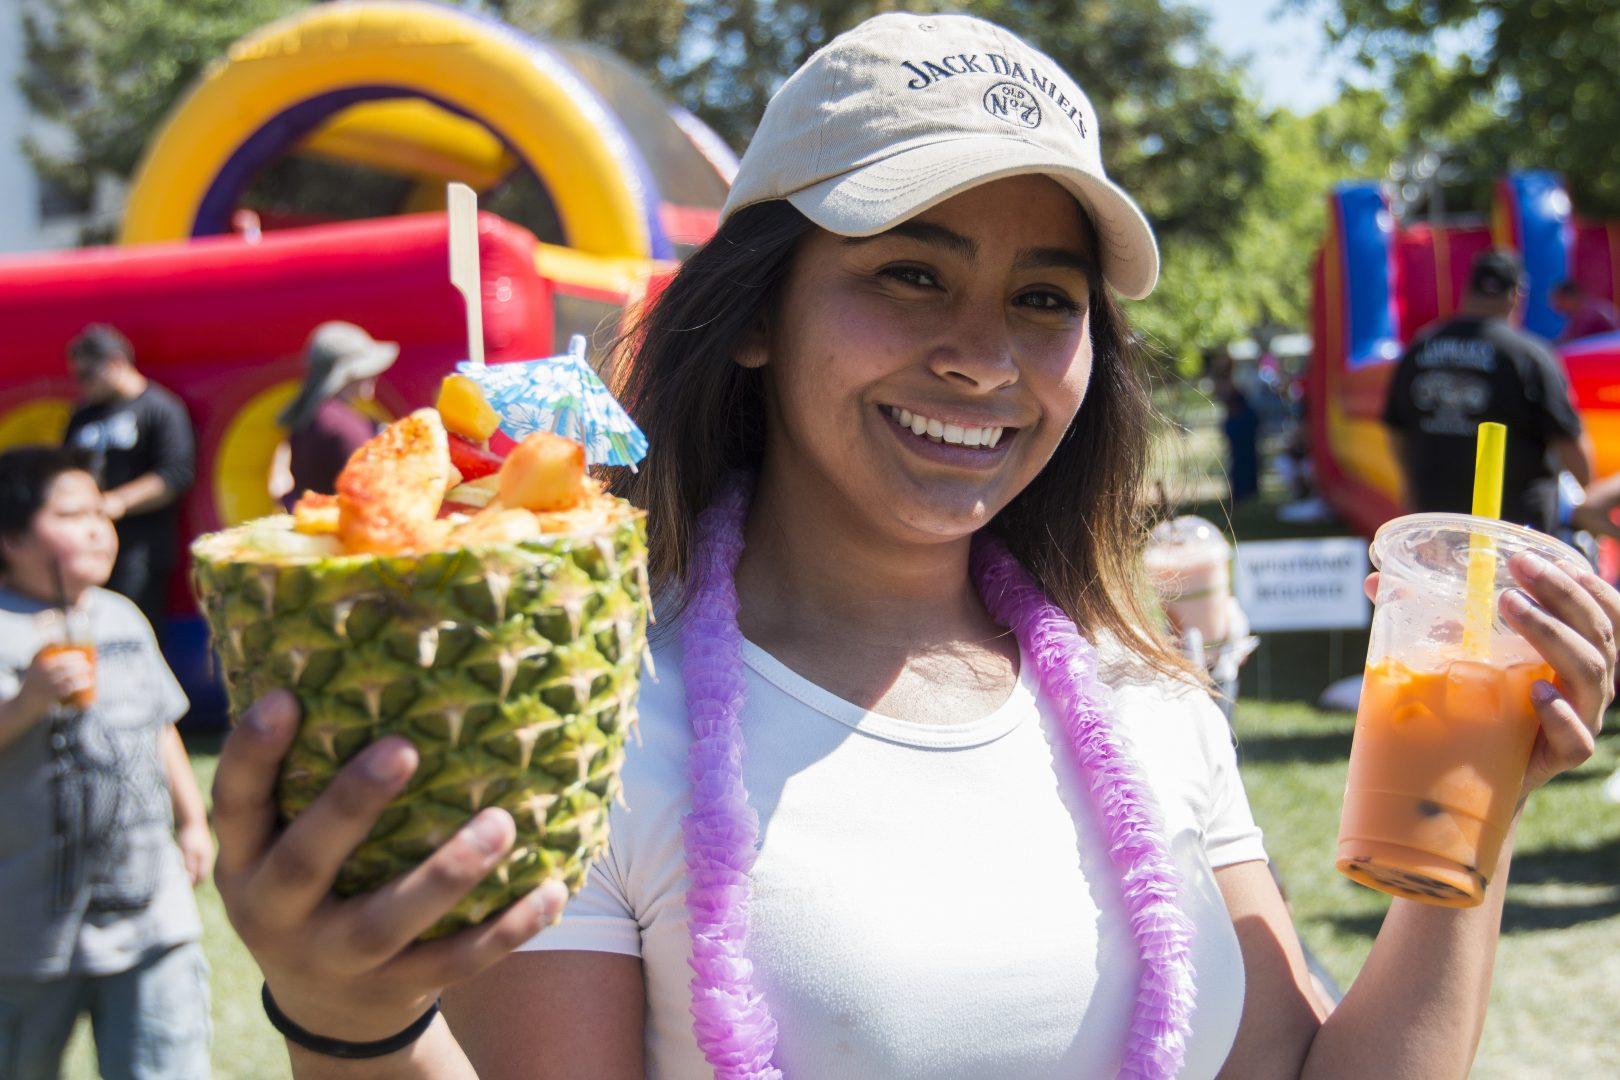 Angela Perez holds a Fineapple on her right hand sold at the International Student Association booth at Vintage Days on April 22, 2018. (Ramuel Reyes/The Collegian)